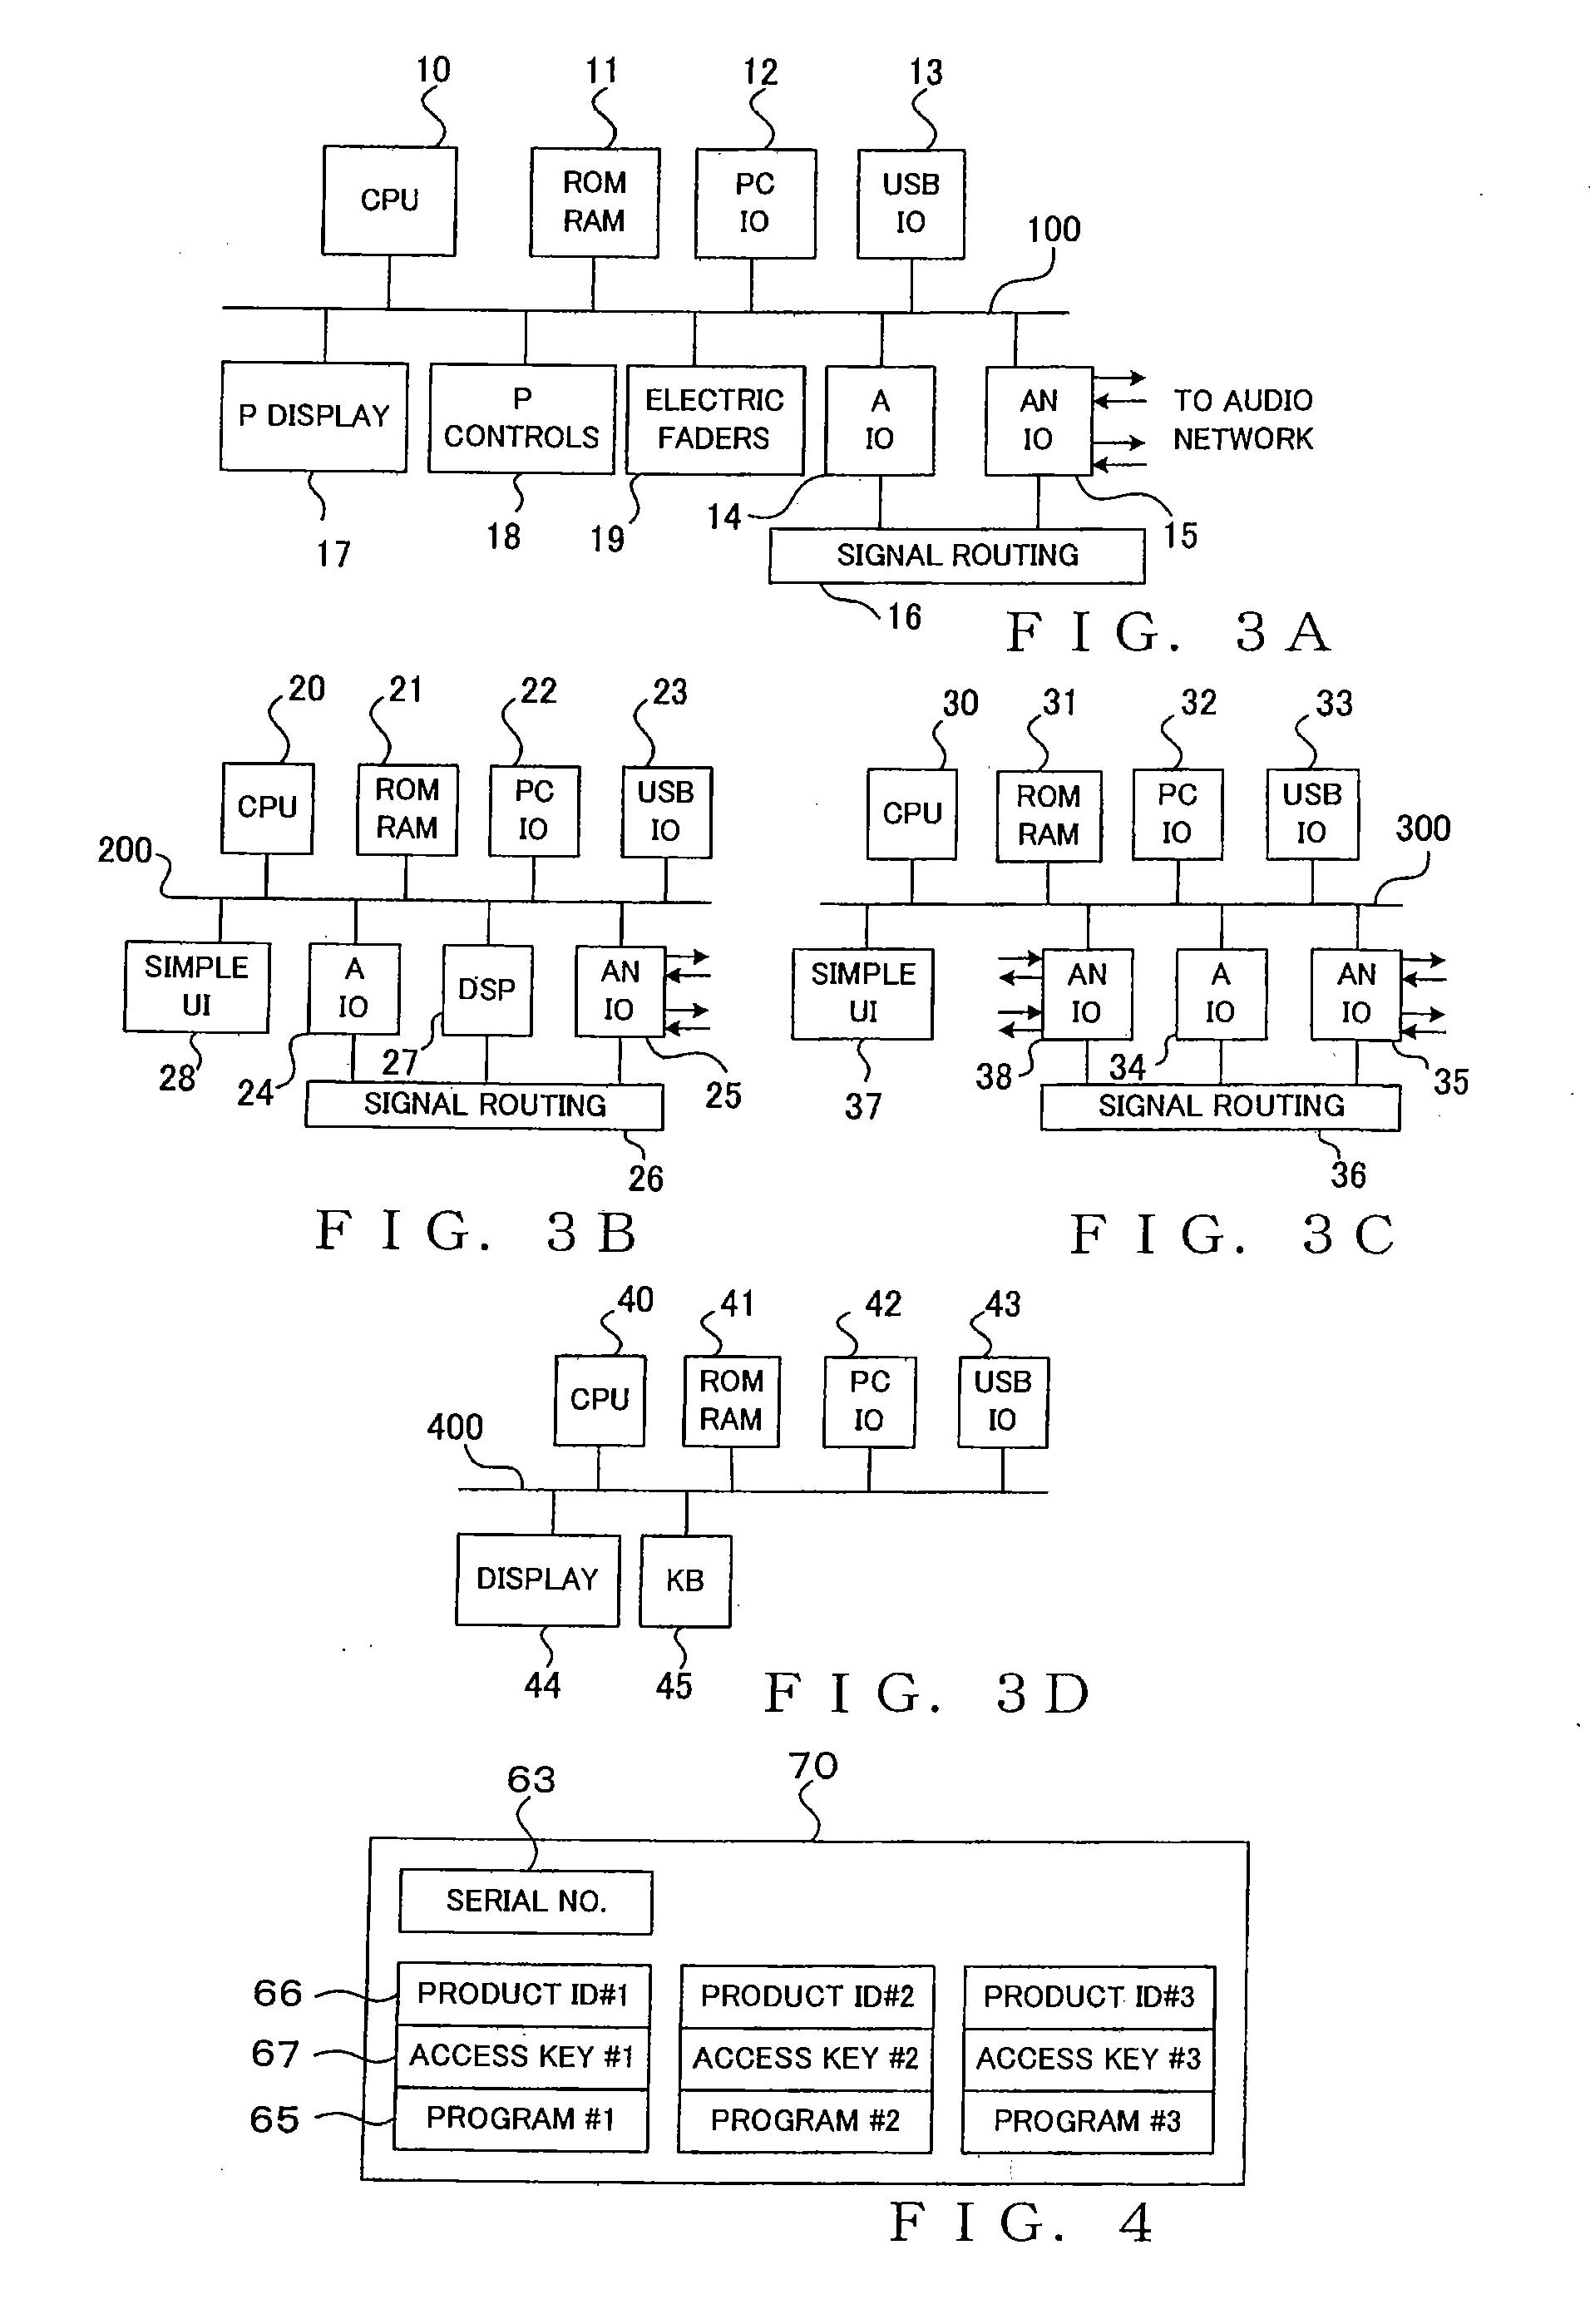 Controlling activation of an application program in an audio signal processing system